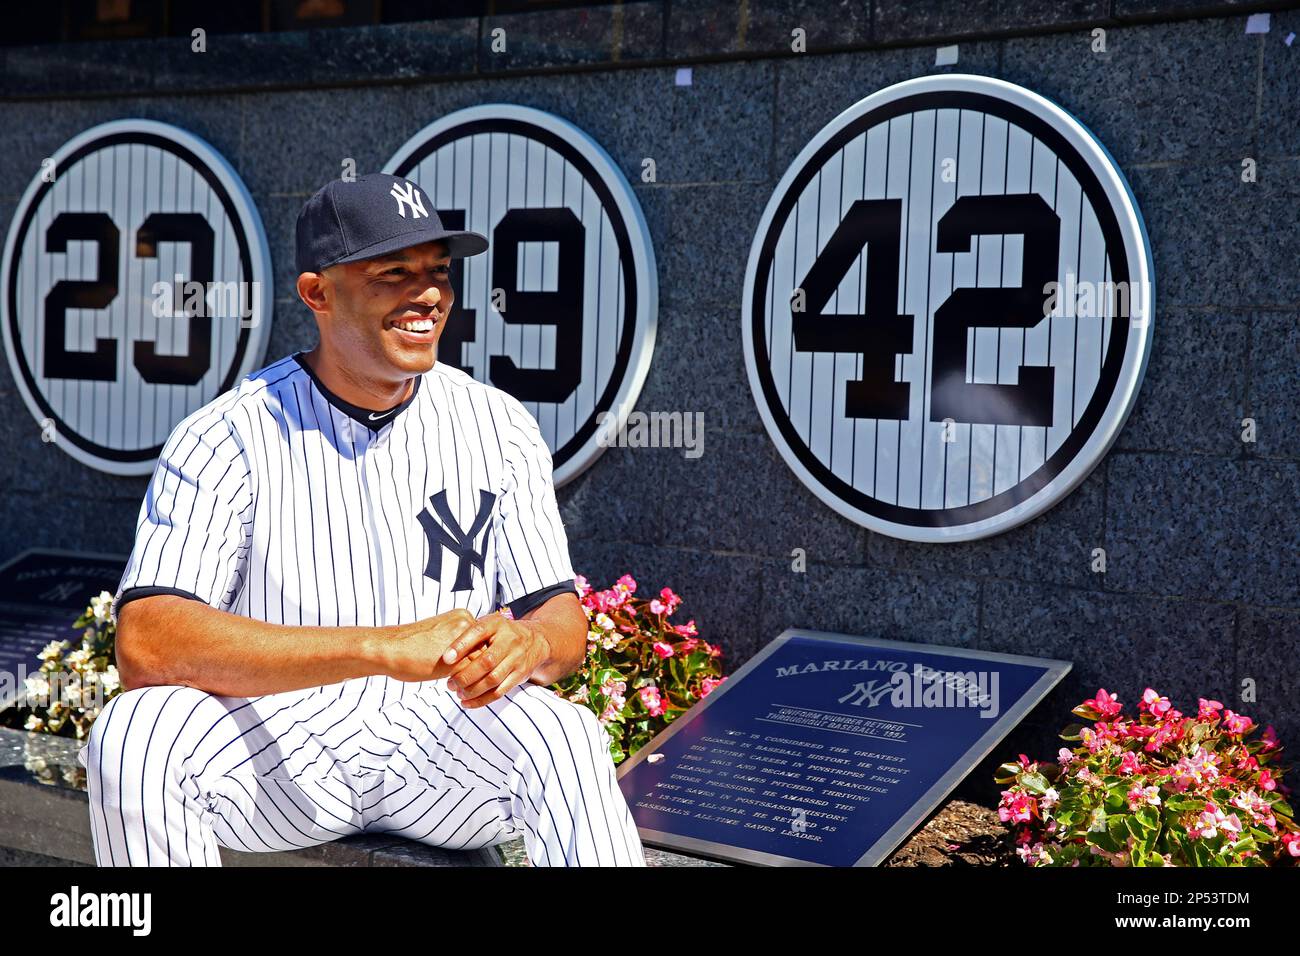 New York Yankees relief pitcher Mariano Rivera (42) poses with a plaque  showing his retired number in Monument Park during a pregame ceremony at  Yankees Stadium before a baseball game against the